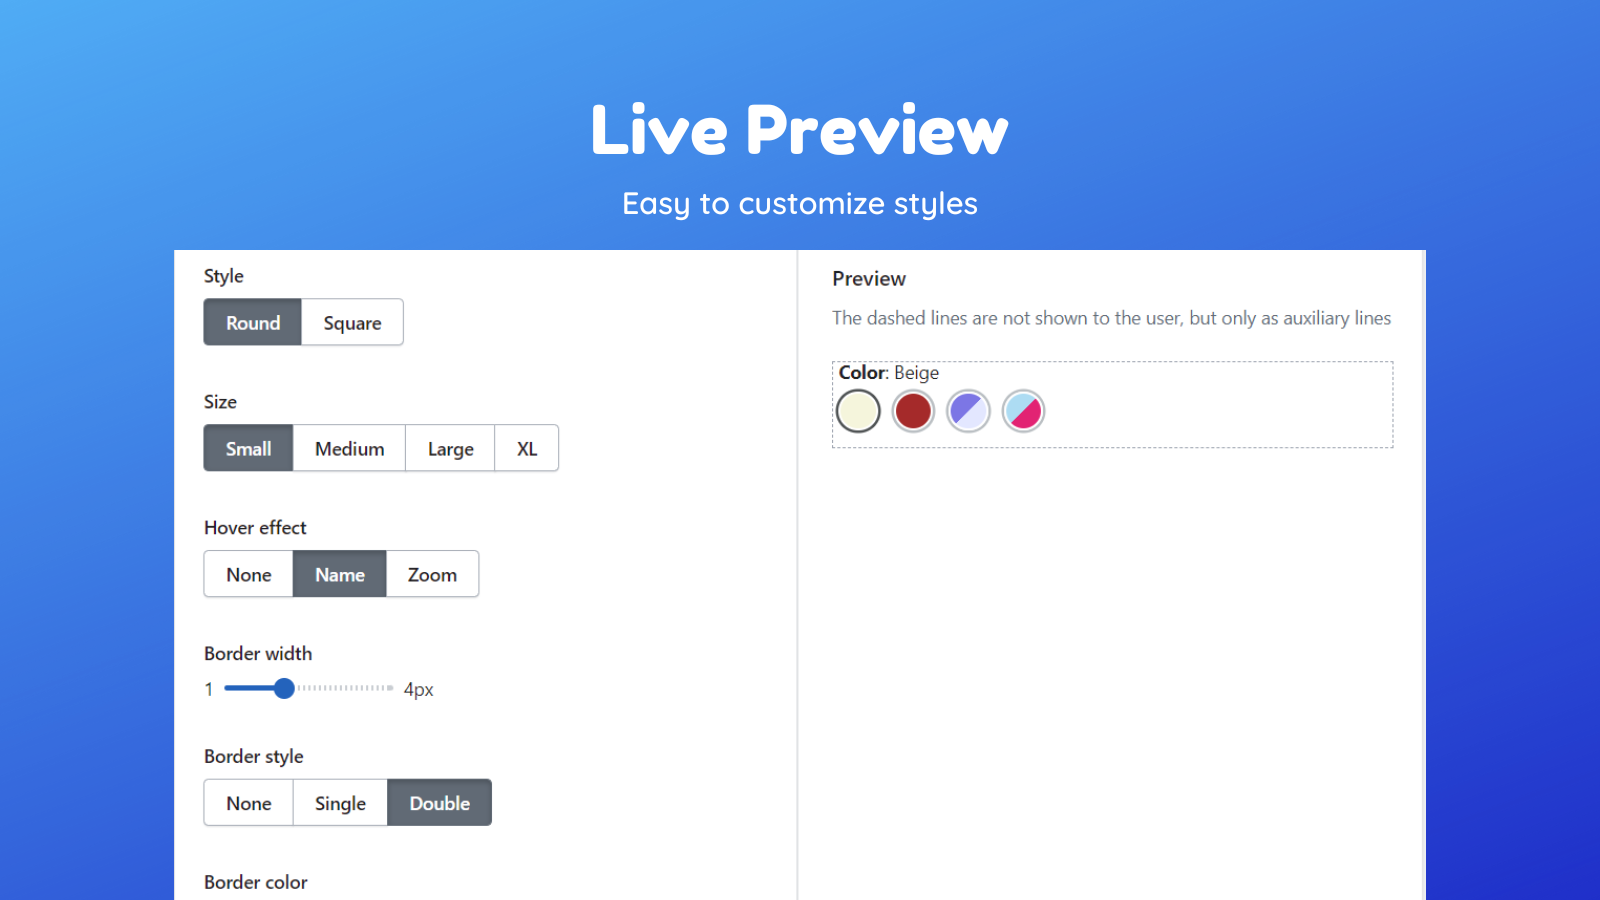 Live priview, easy configuration